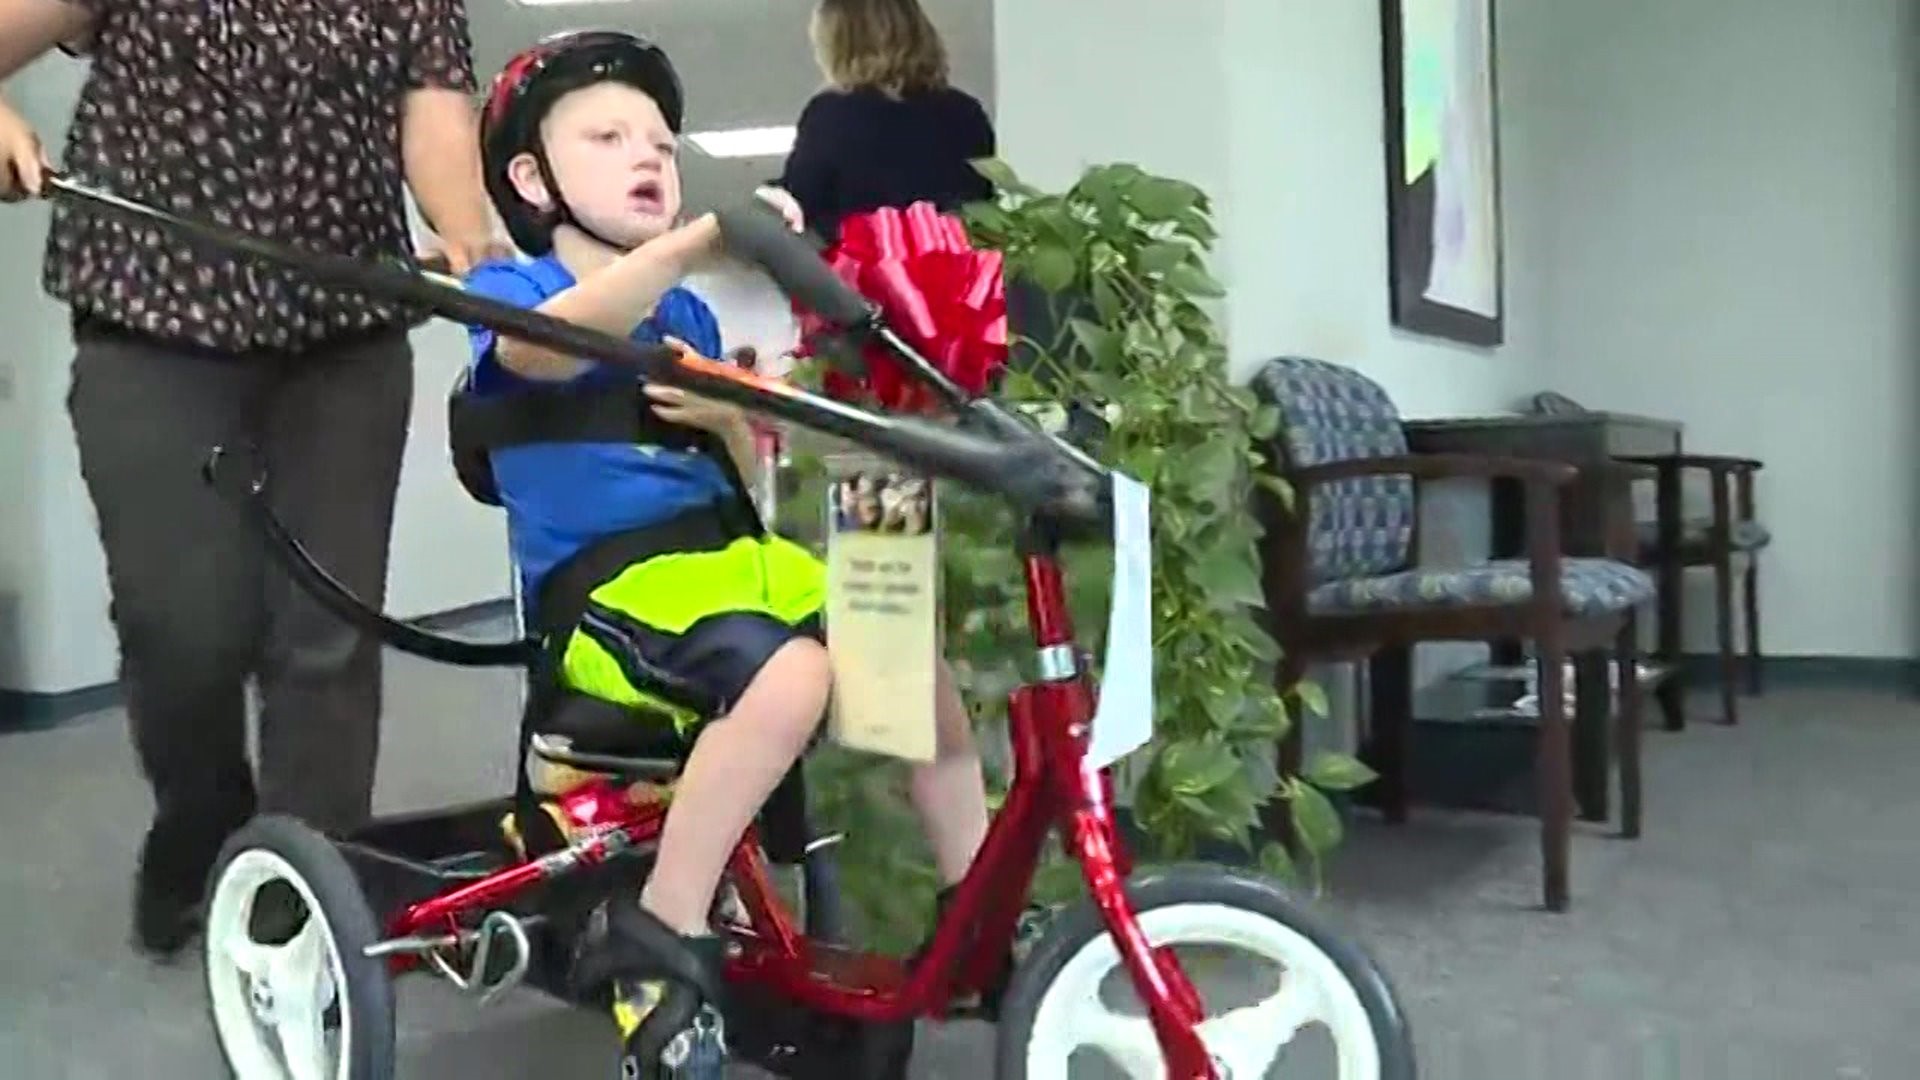 Children with disabilities receive adaptive bikes